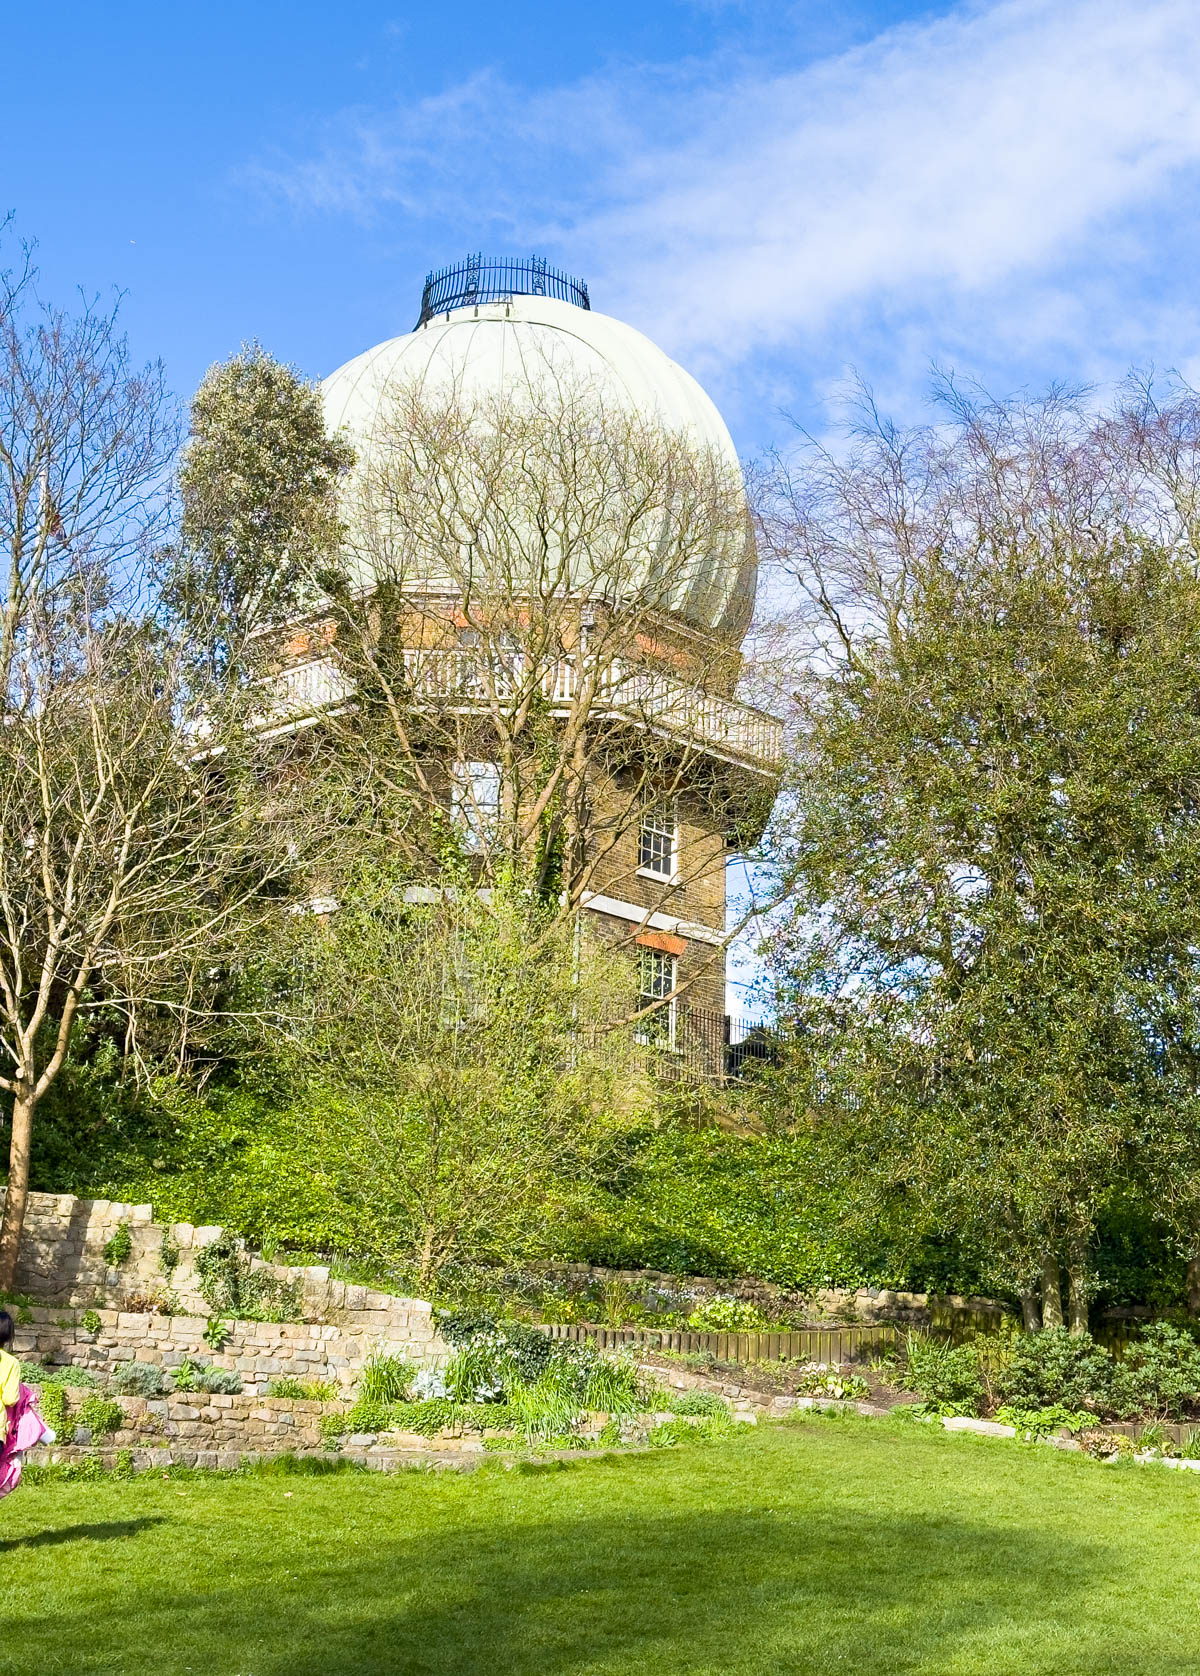 The observatory dome is seen from below in a green park.